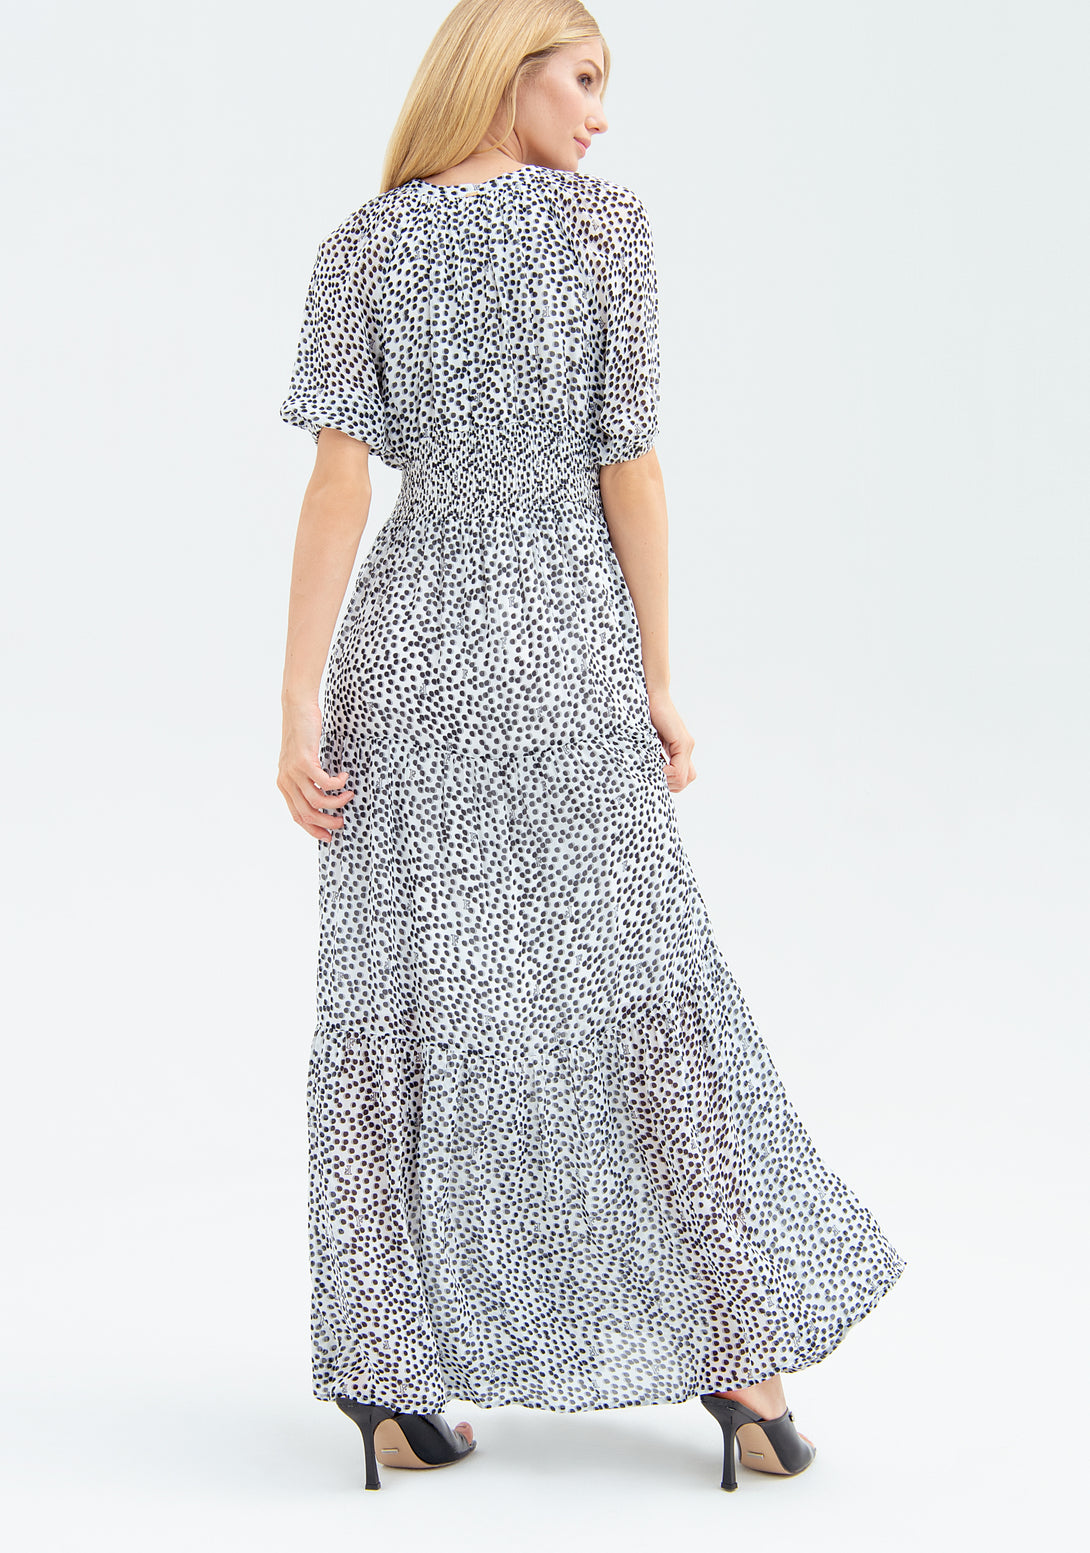 Dress regular fit made with polka dots pattern